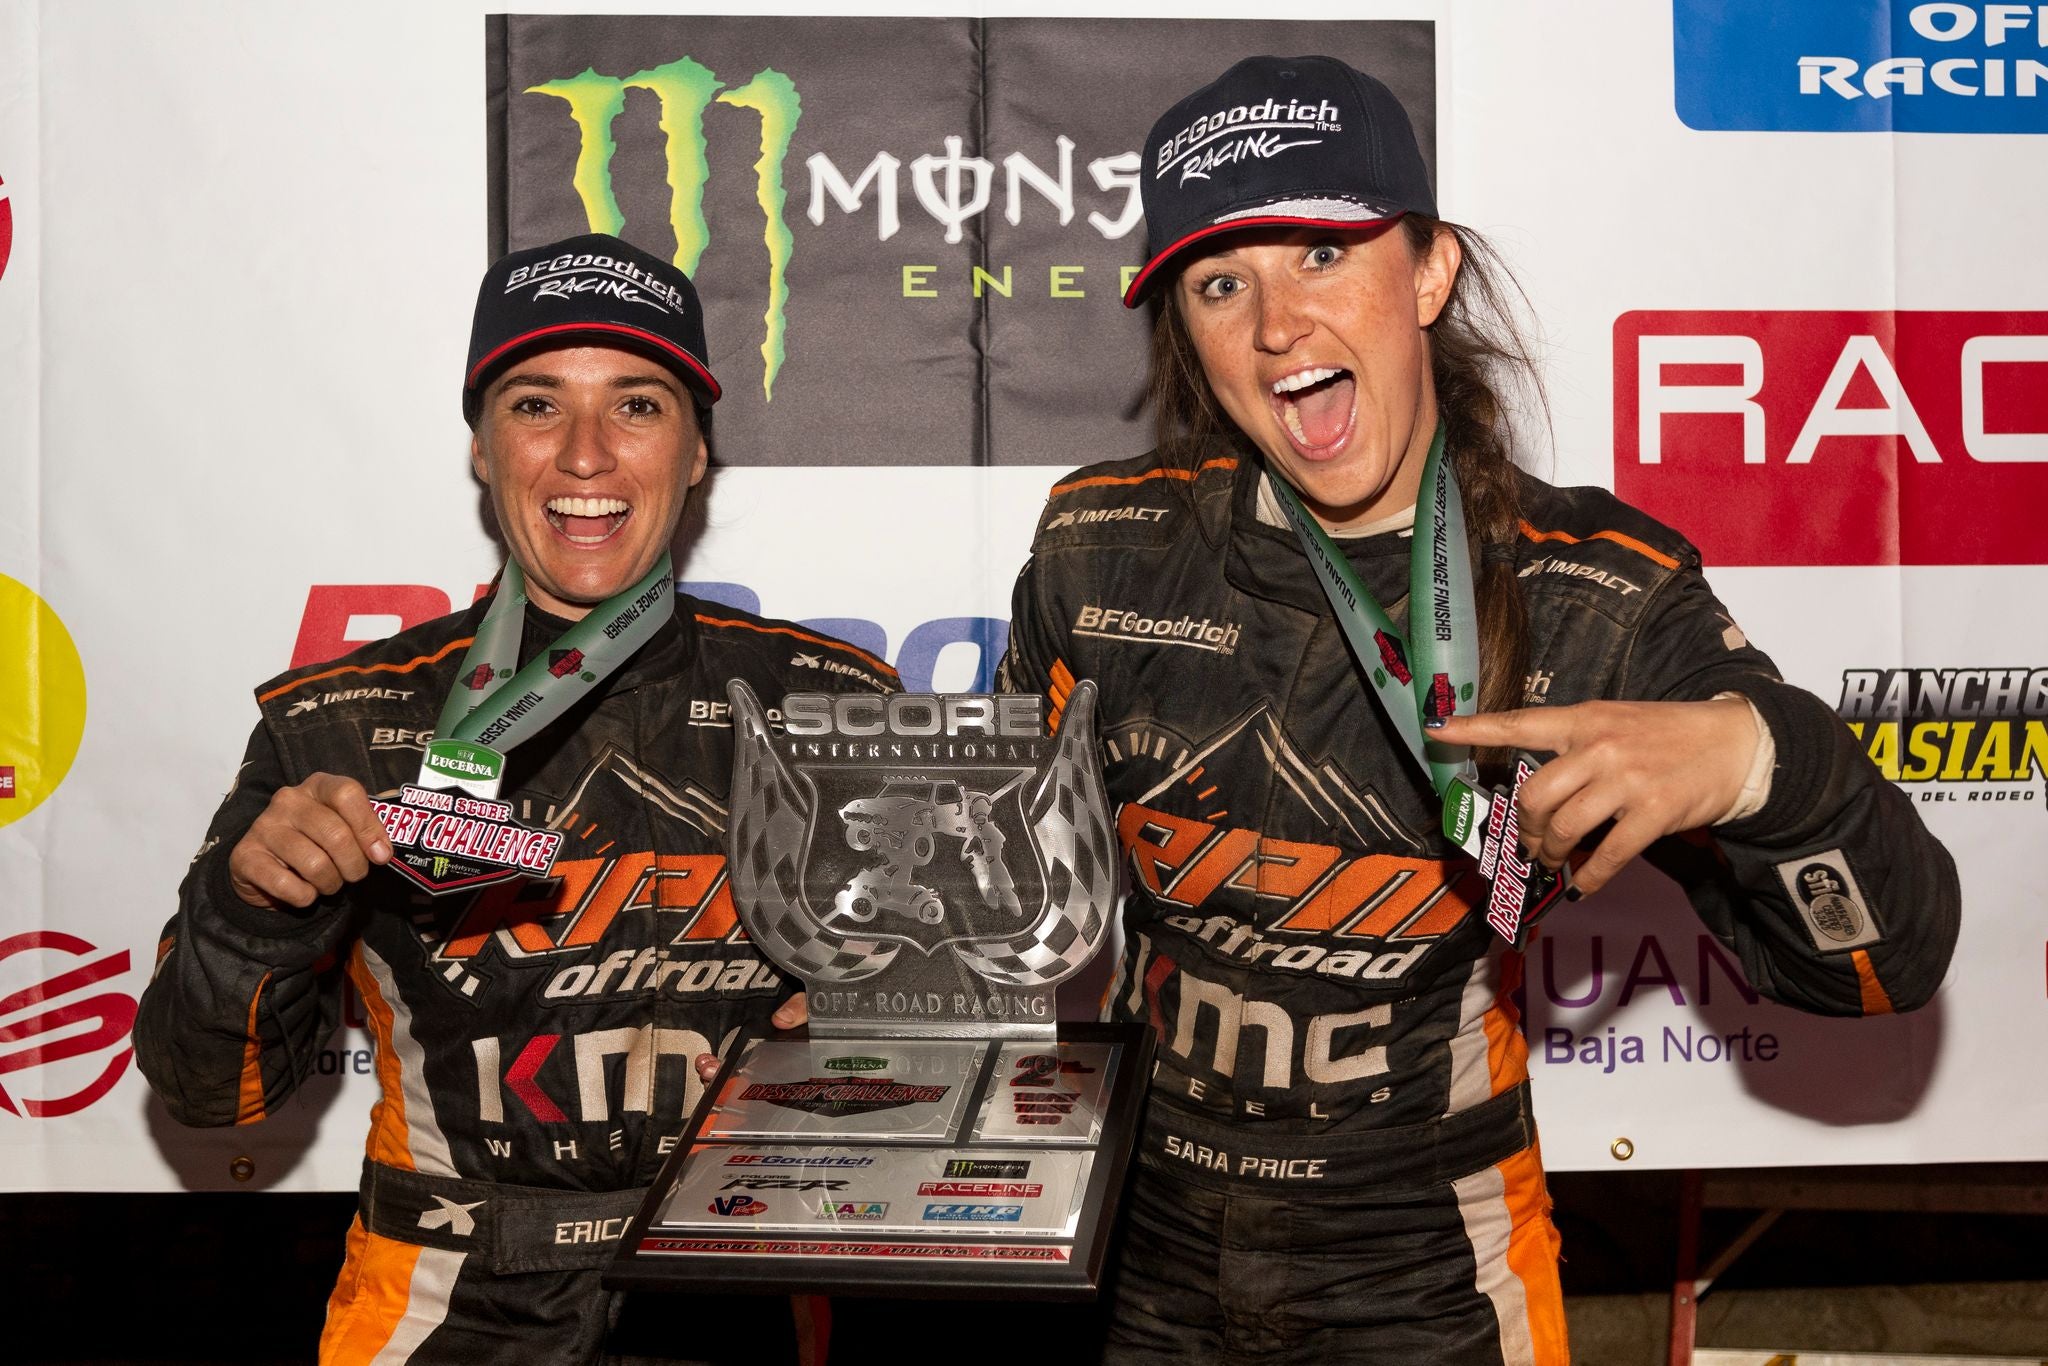 Sara Price first-ever podium finish in the SCORE International Offroad series